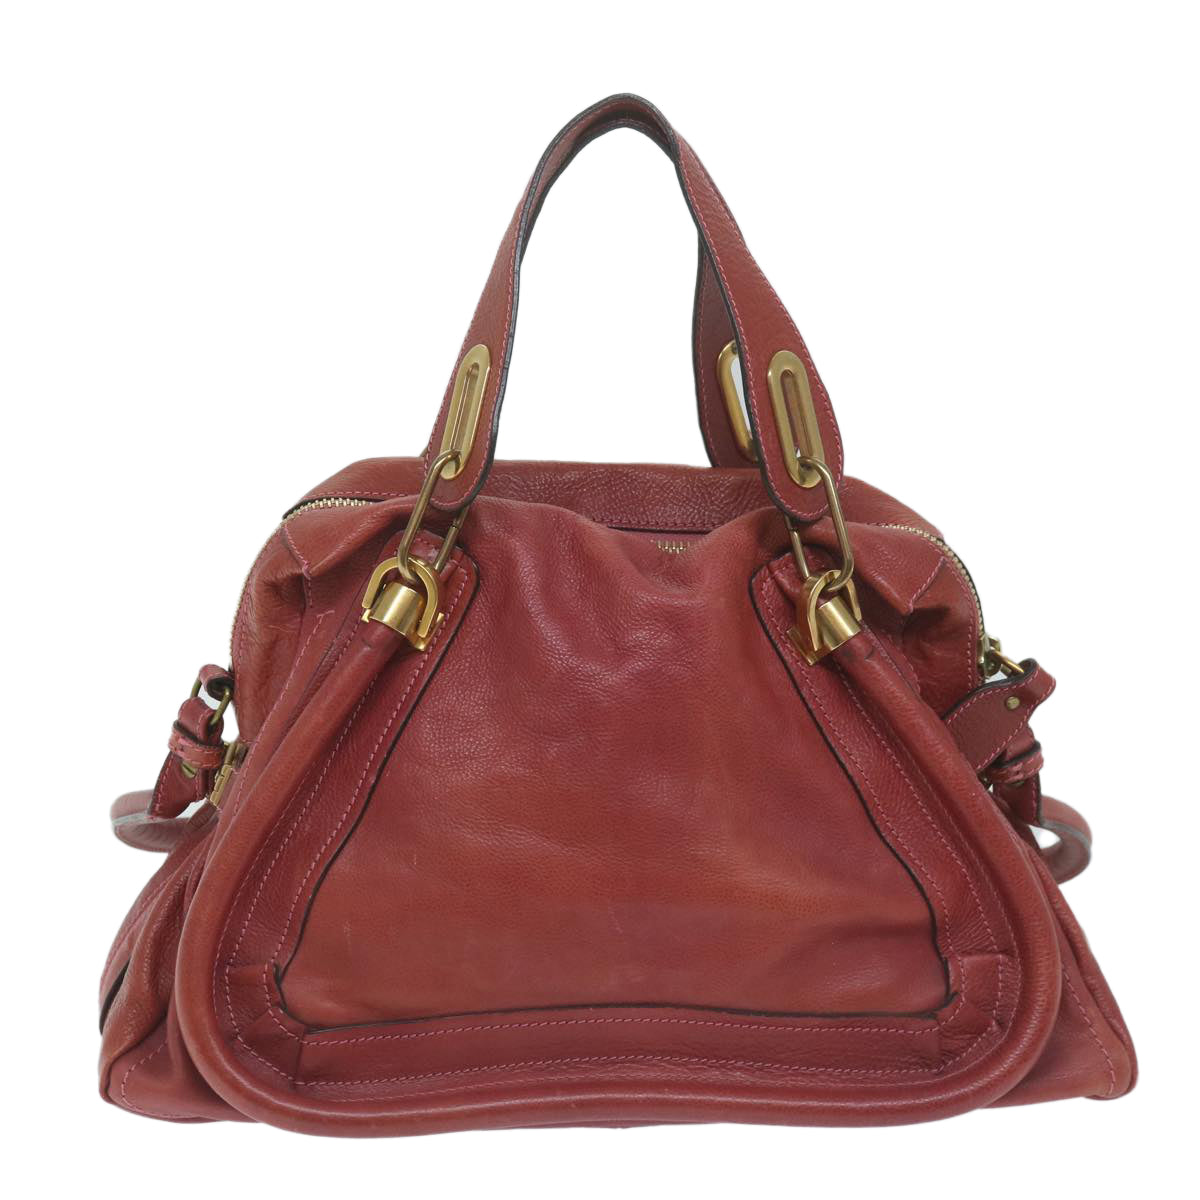 Chloe Paraty Hand Bag Leather Red Auth am5508